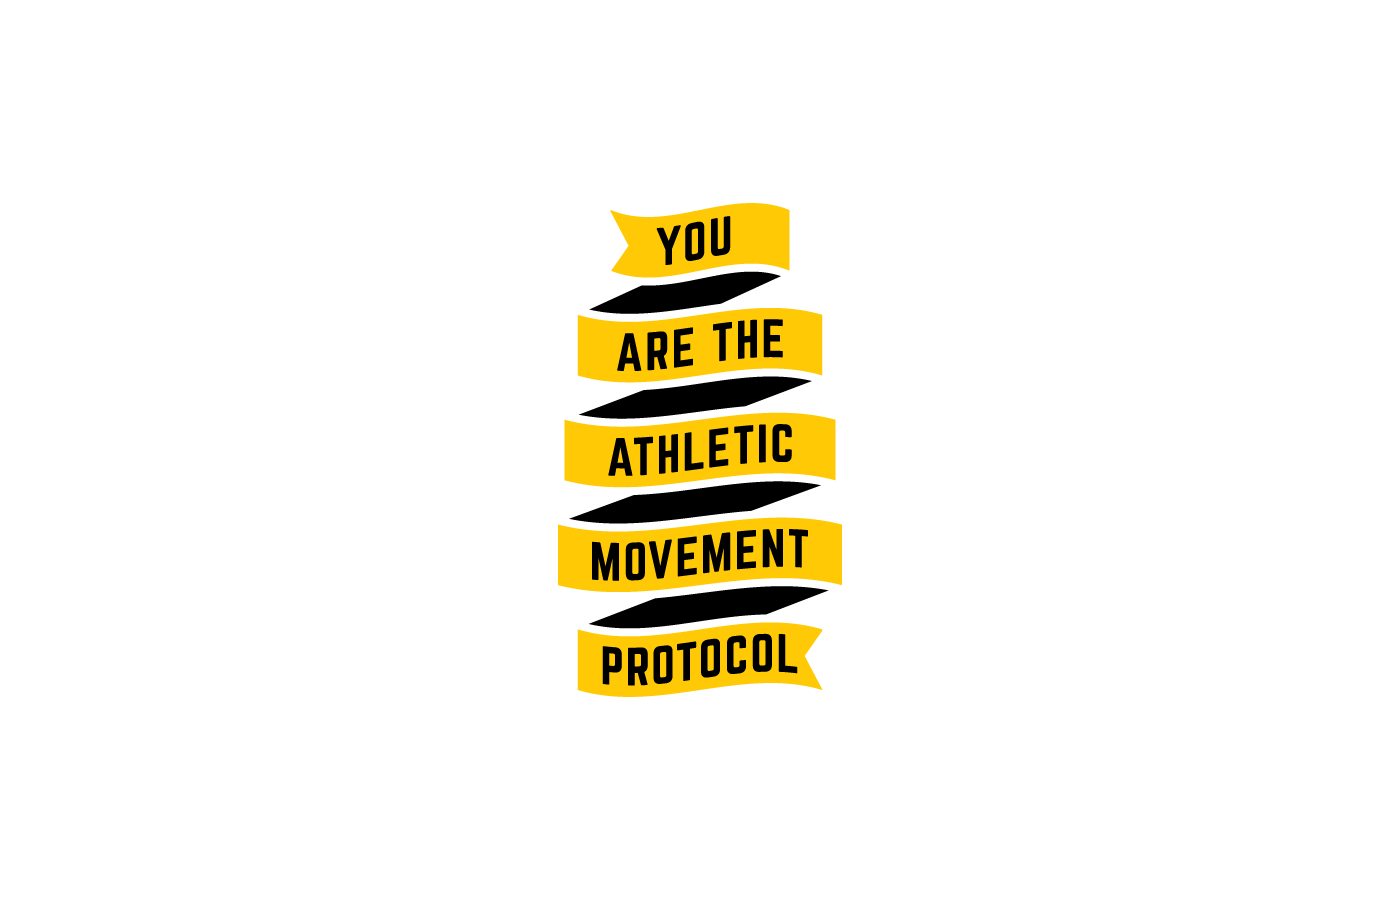 The Athletic Movement